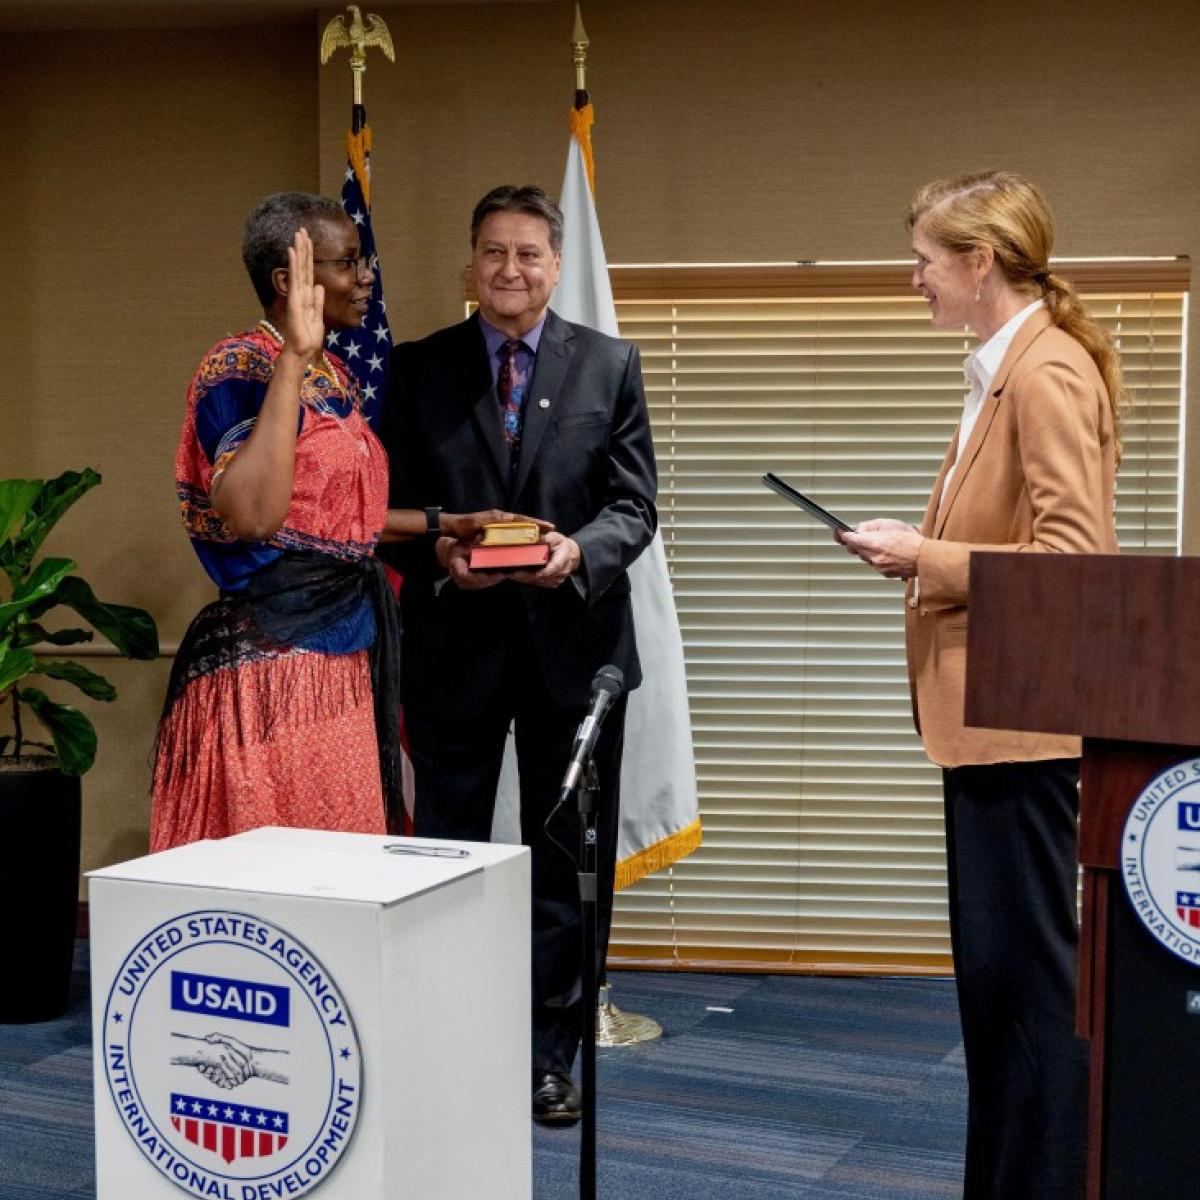 Zambian-born Dr. Monde Muyangwa (left) being sworn in as the United States Agency for International Development (USAID) Assistant Administrator for the Africa Bureau by USAID Administrator Samantha Power (right).